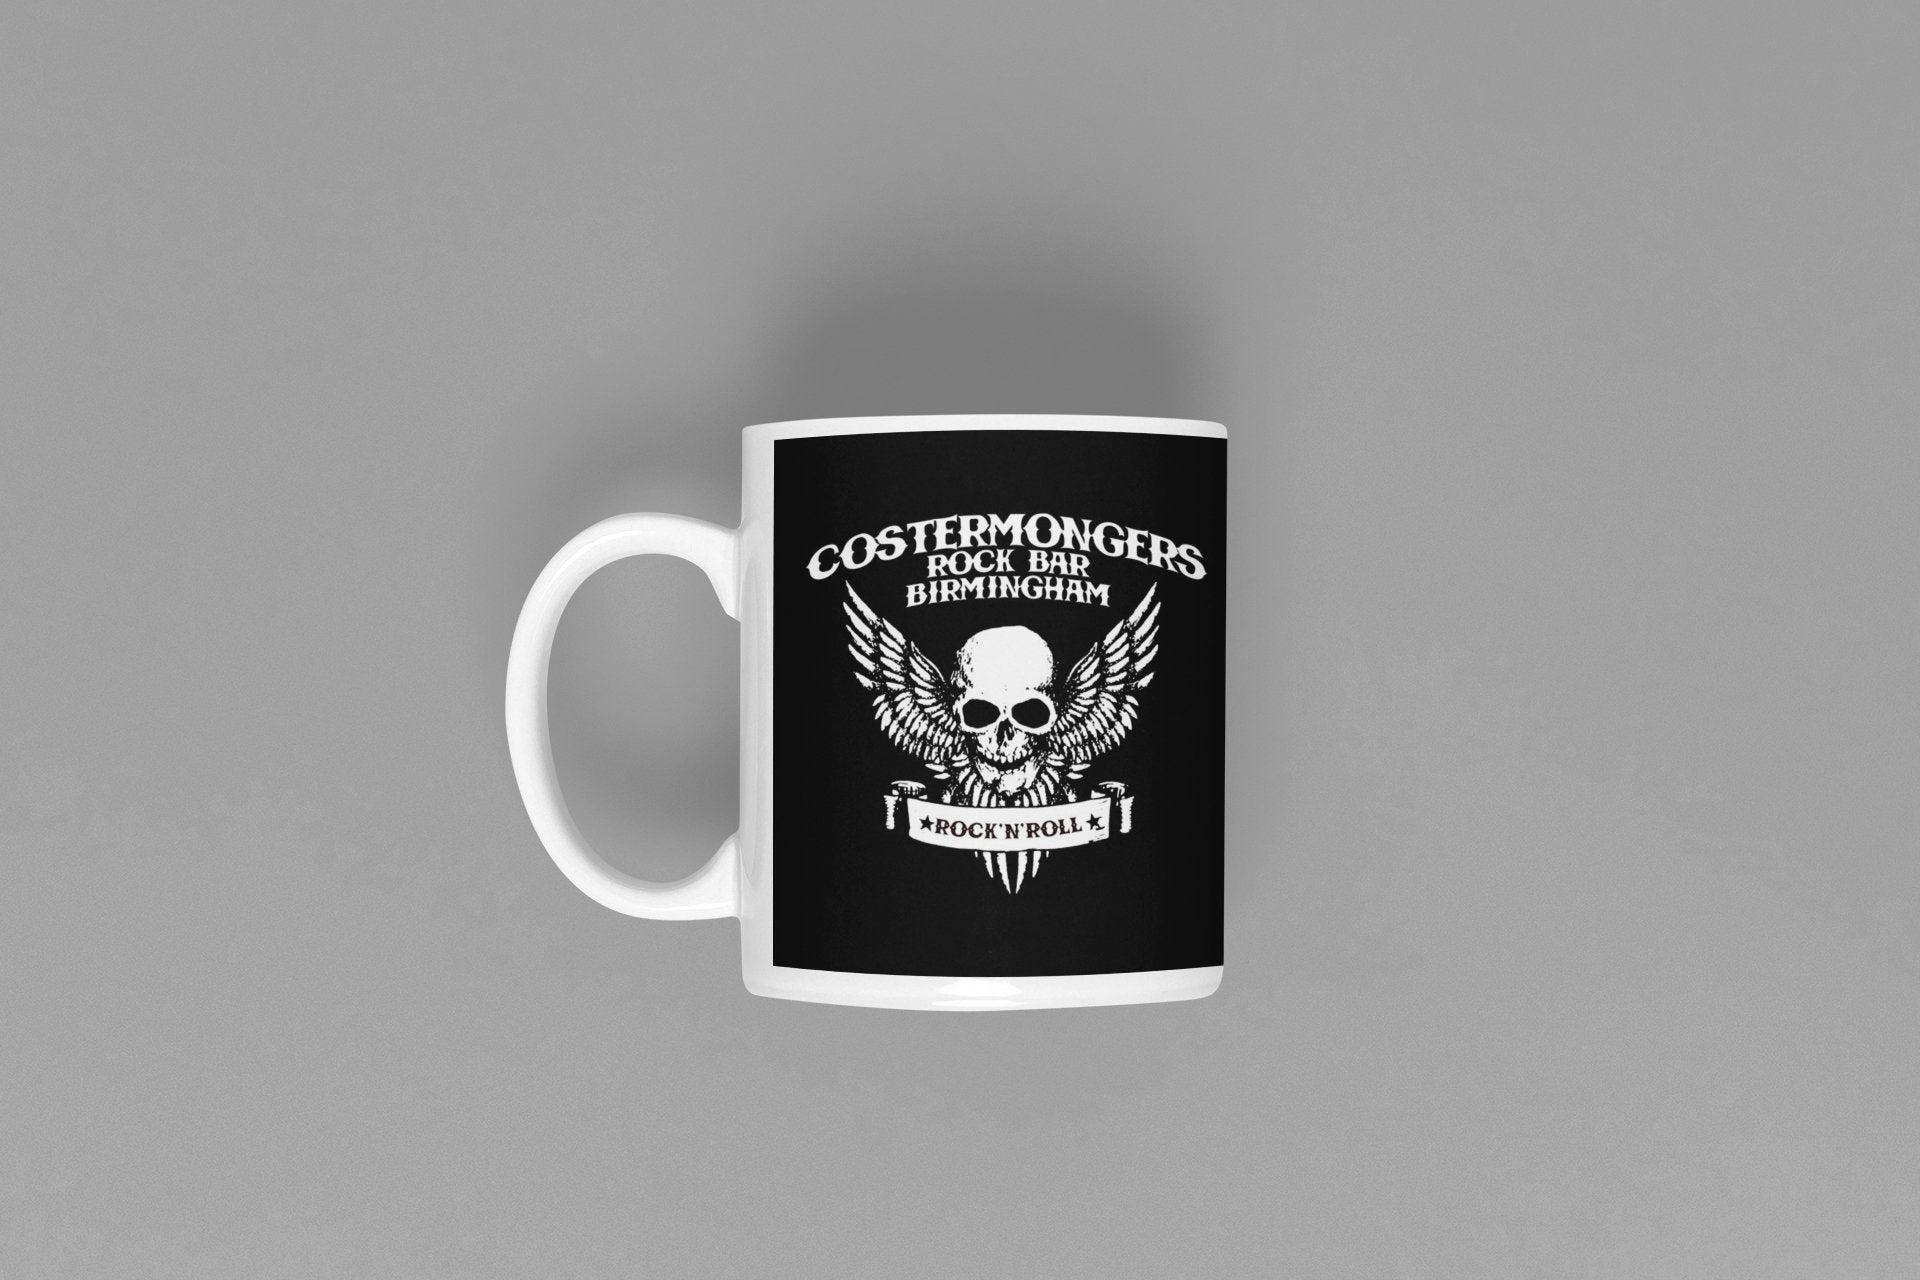 Costermongers mug - Dirty Stop Outs